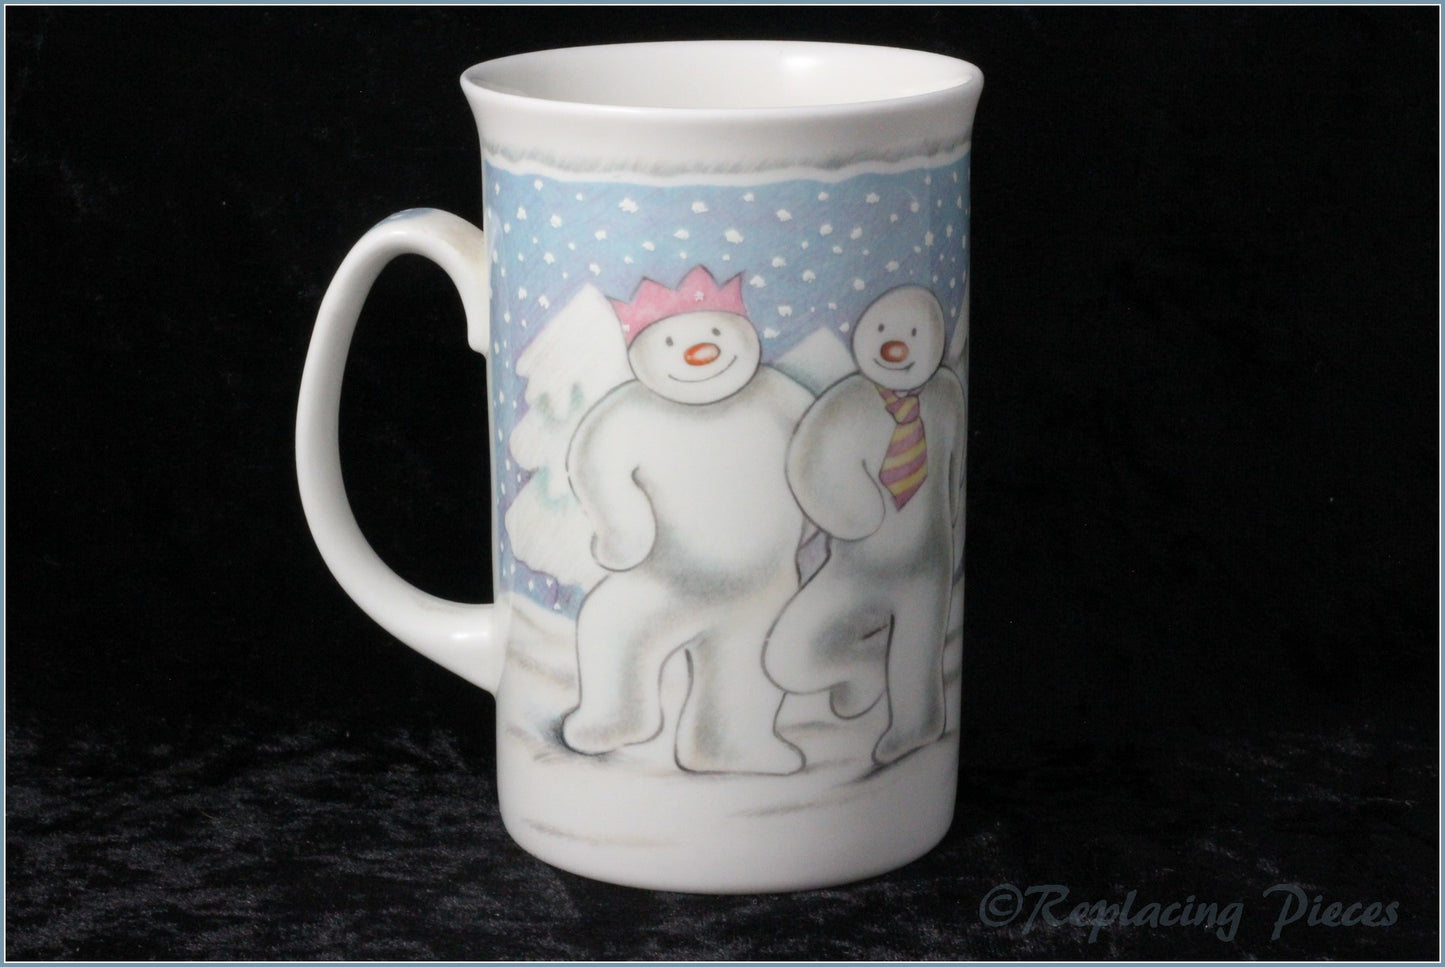 Royal Doulton - The Snowman Gift Collection - Mug 'The Party'